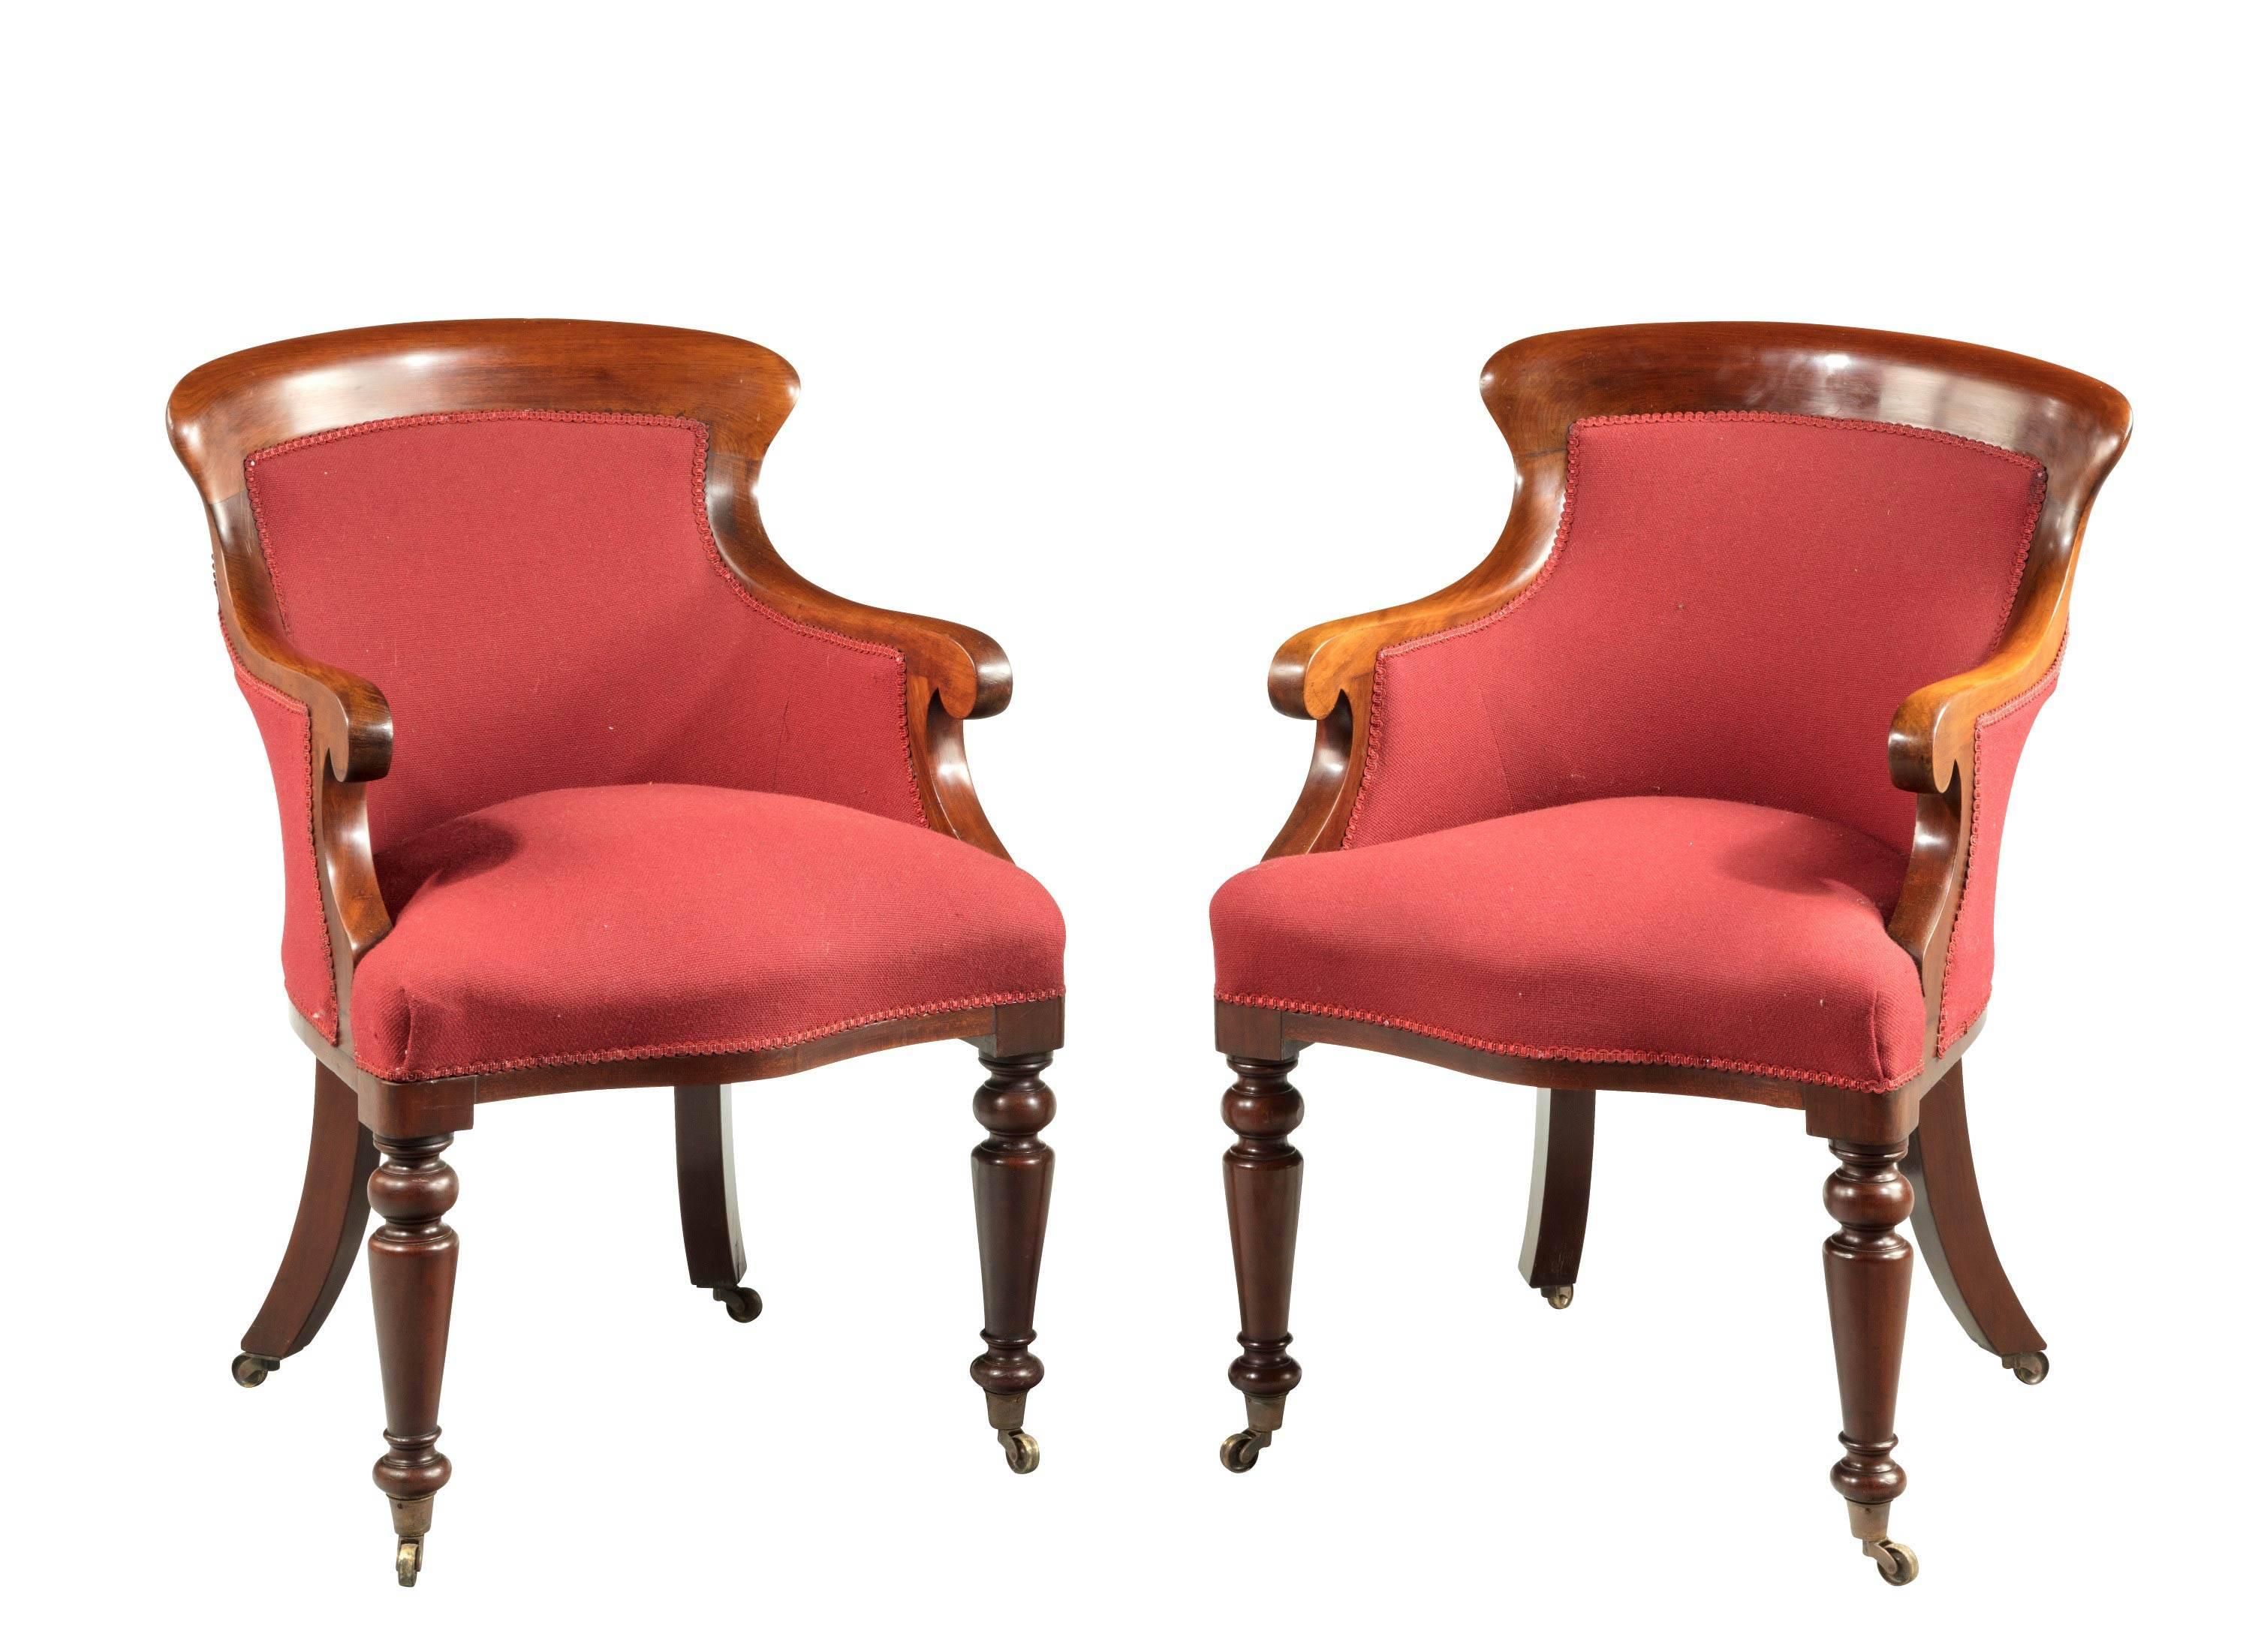 Pair of Early Victorian Period Mahogany Framed Chairs